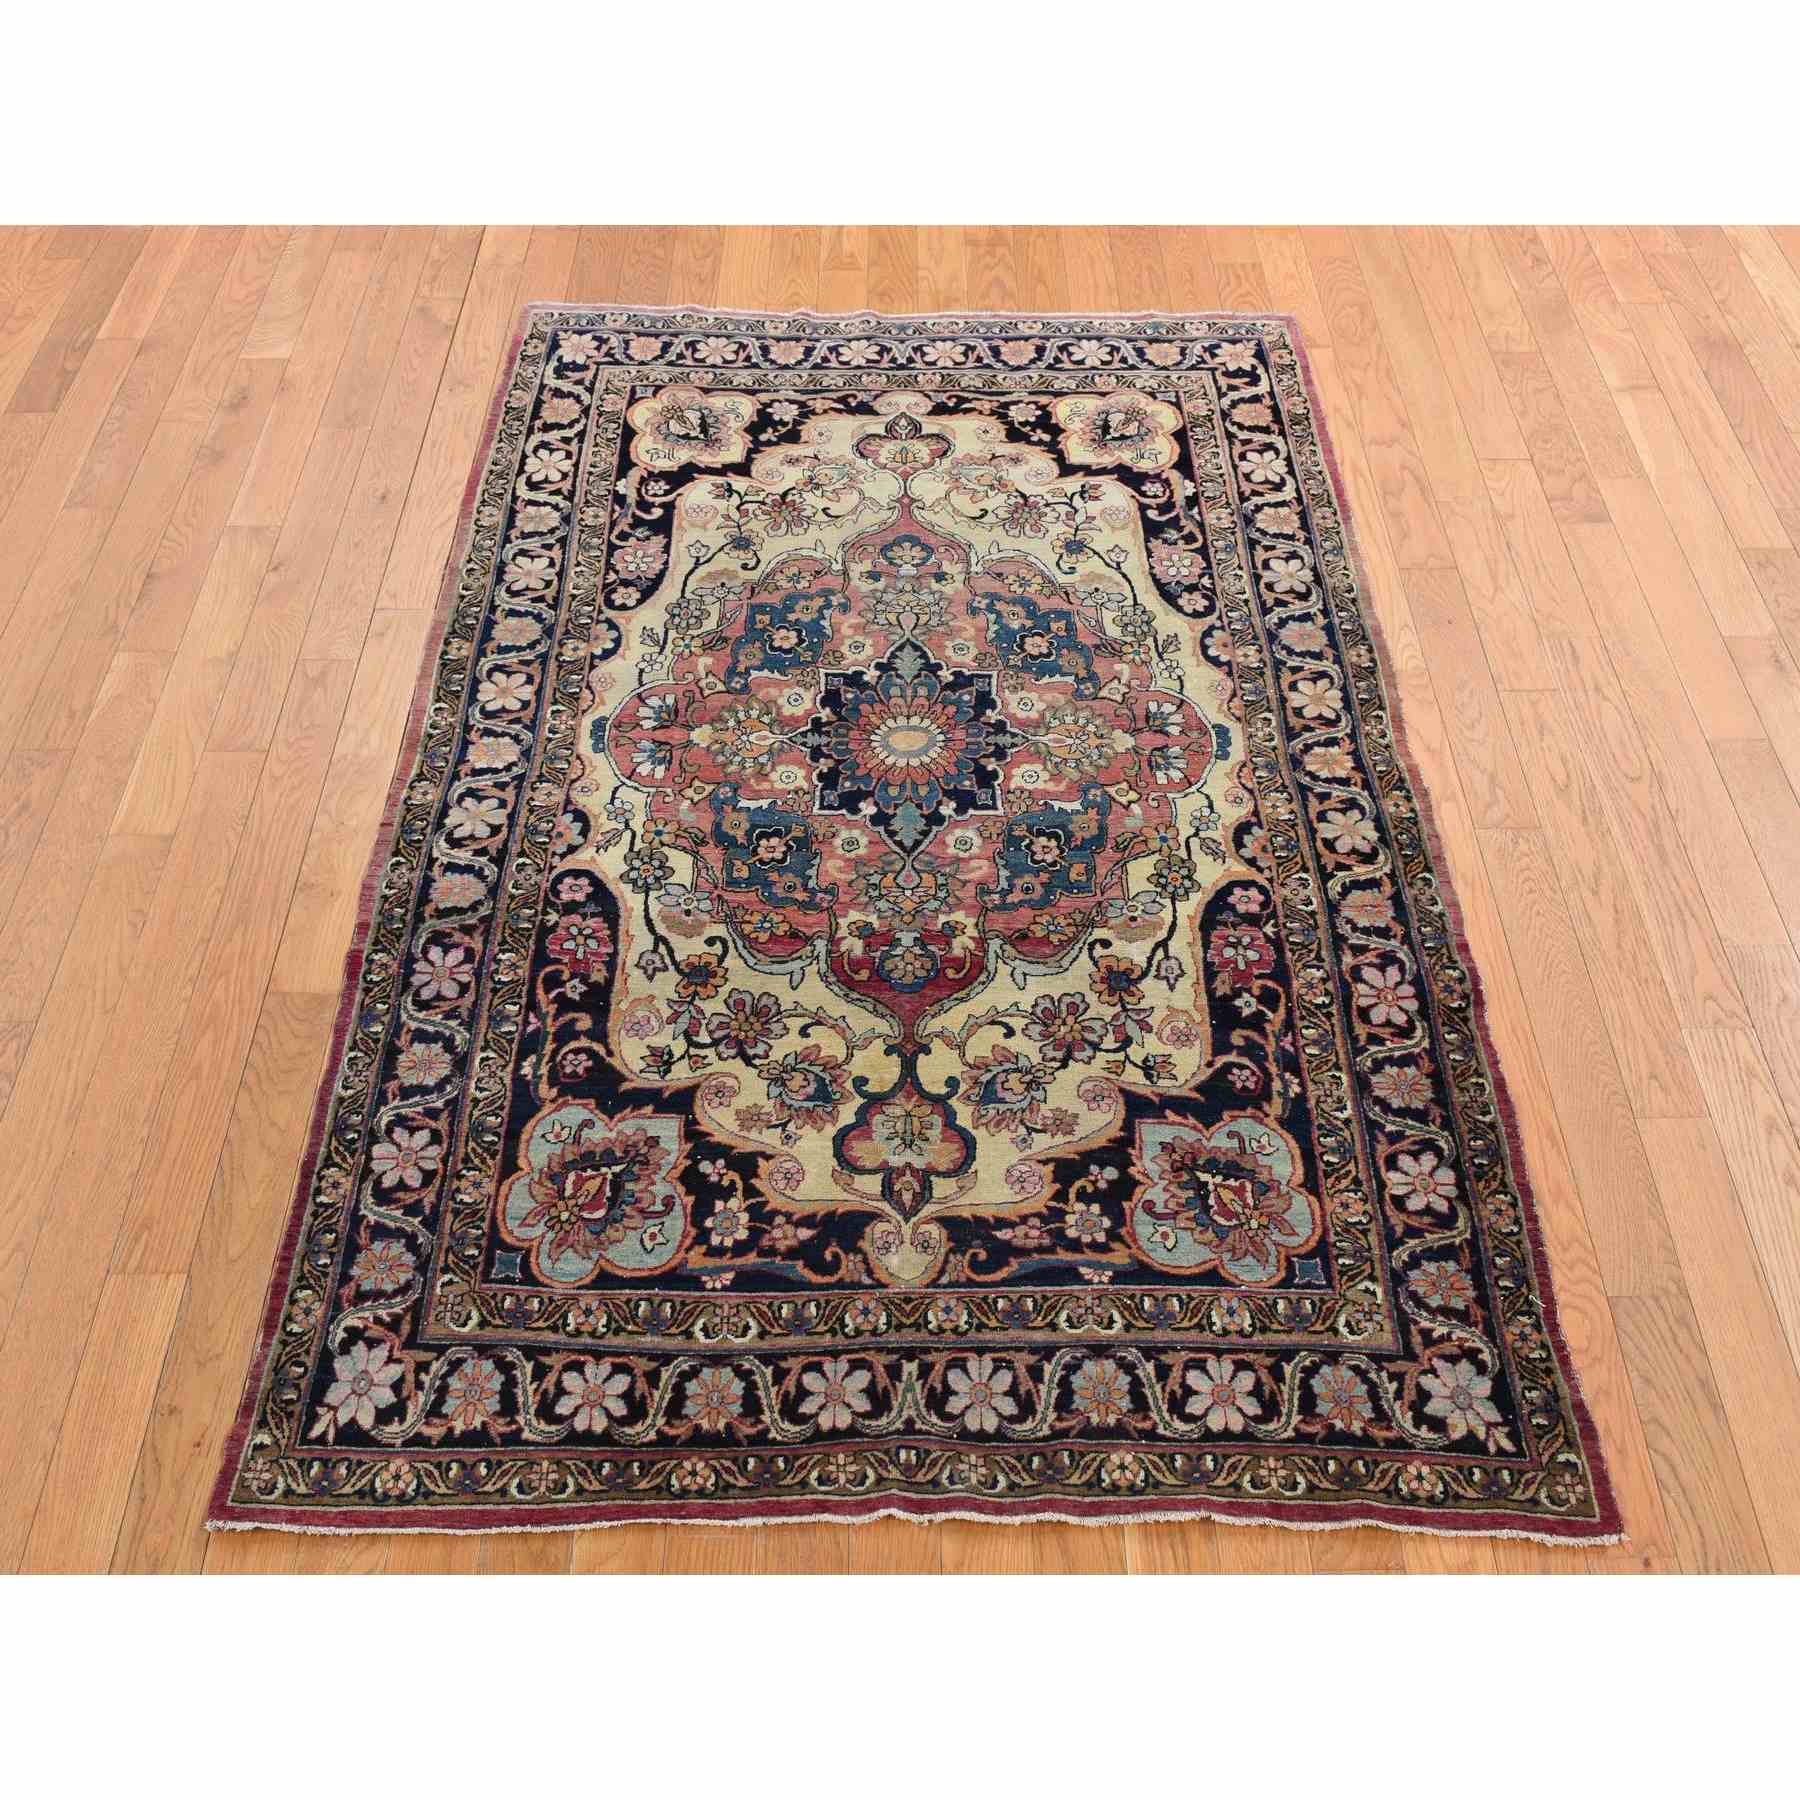 Antique-Hand-Knotted-Rug-390905